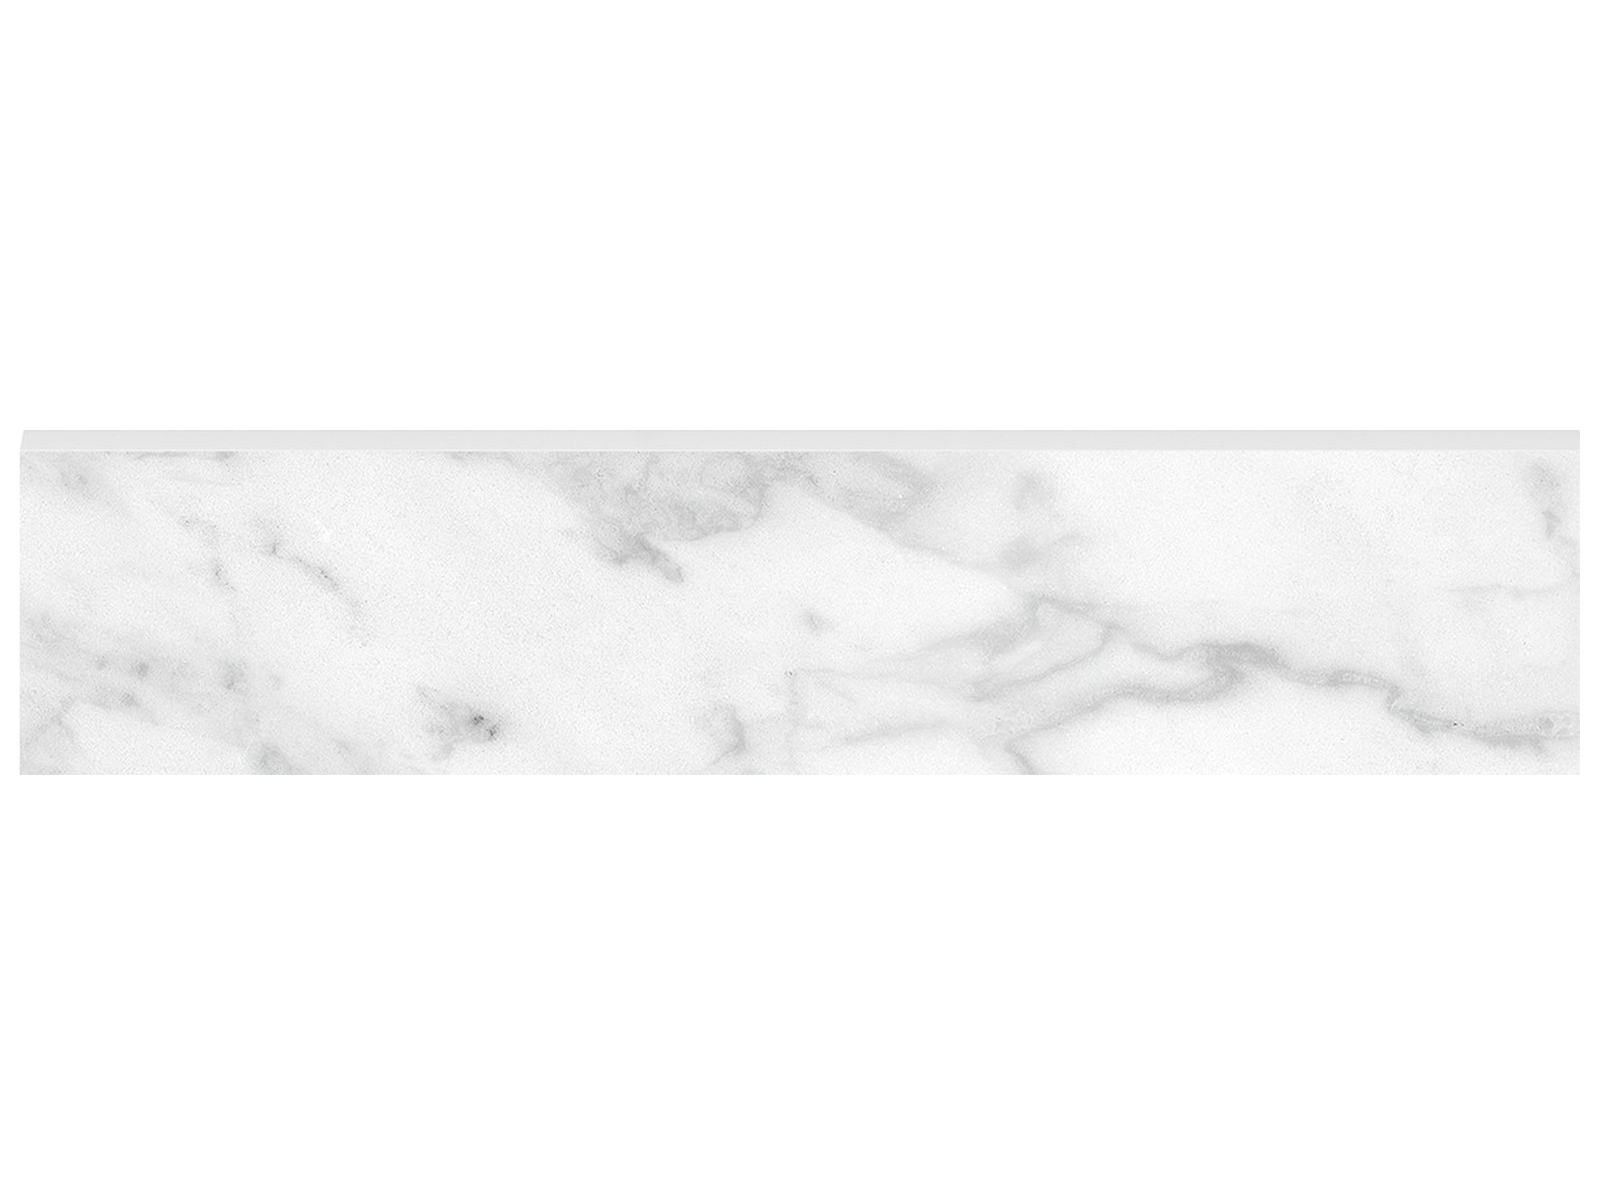 carrara abisso pattern glazed porcelain bullnose molding from plata anatolia collection distributed by surface group international polished finish straight edge edge 3x12 bar shape